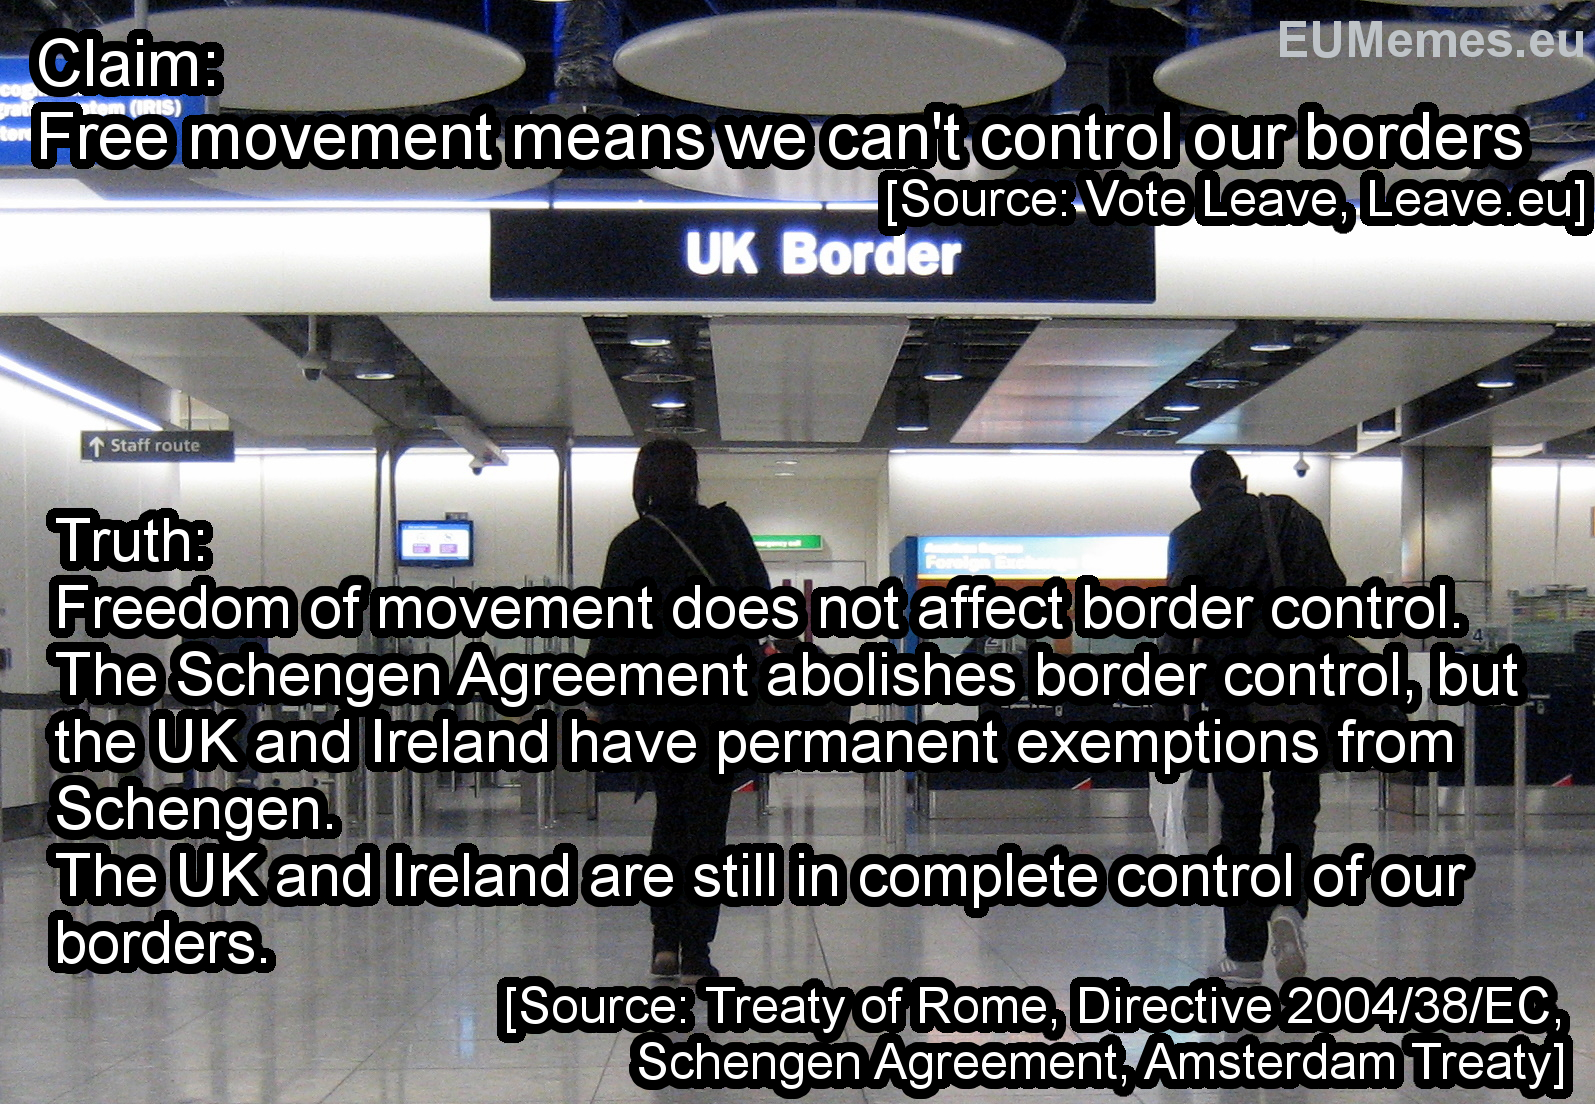 The UK has complete control of its borders